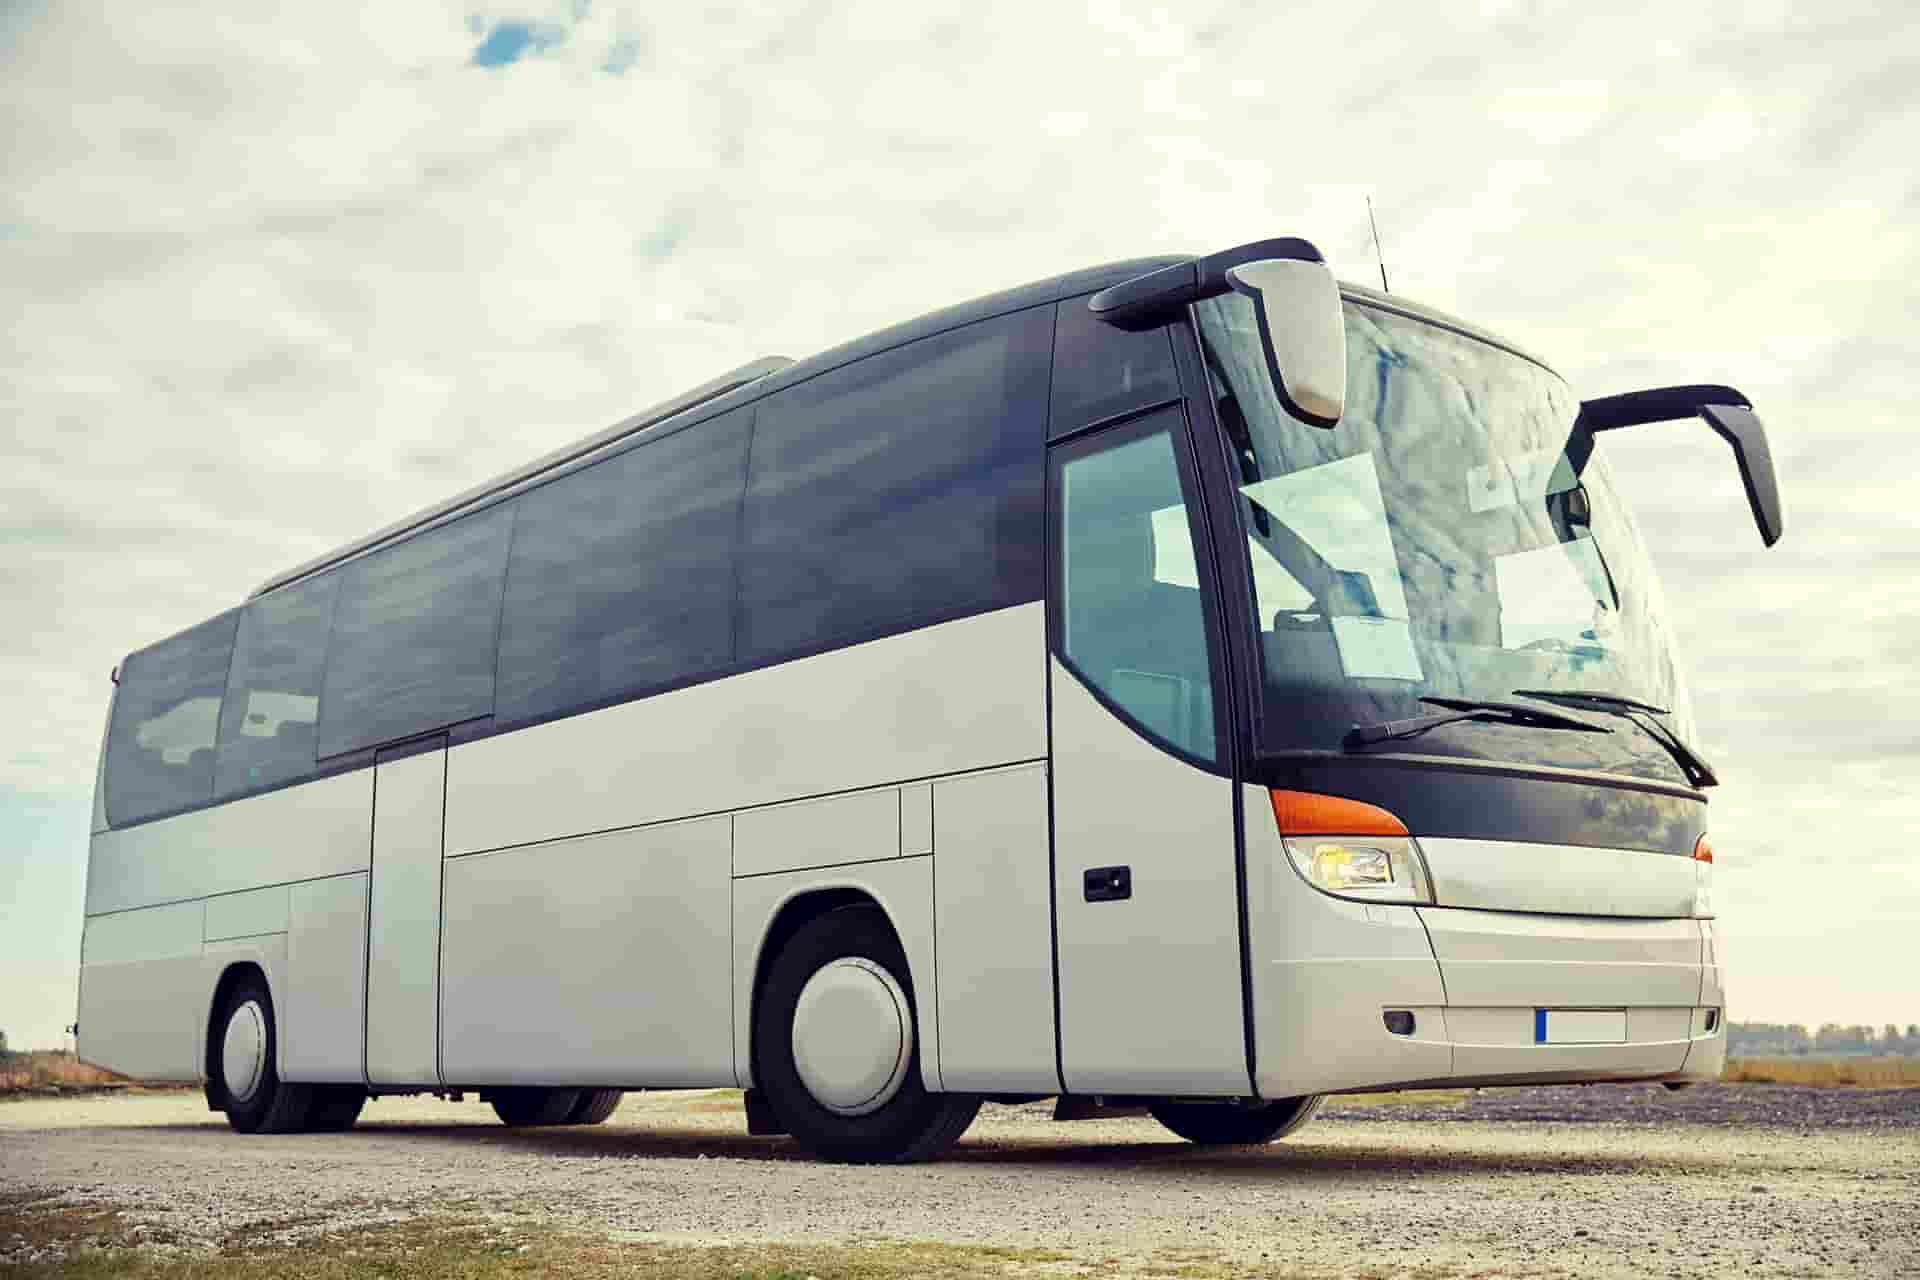 Hire Comfortable Buses with Professional Drivers in Dubai